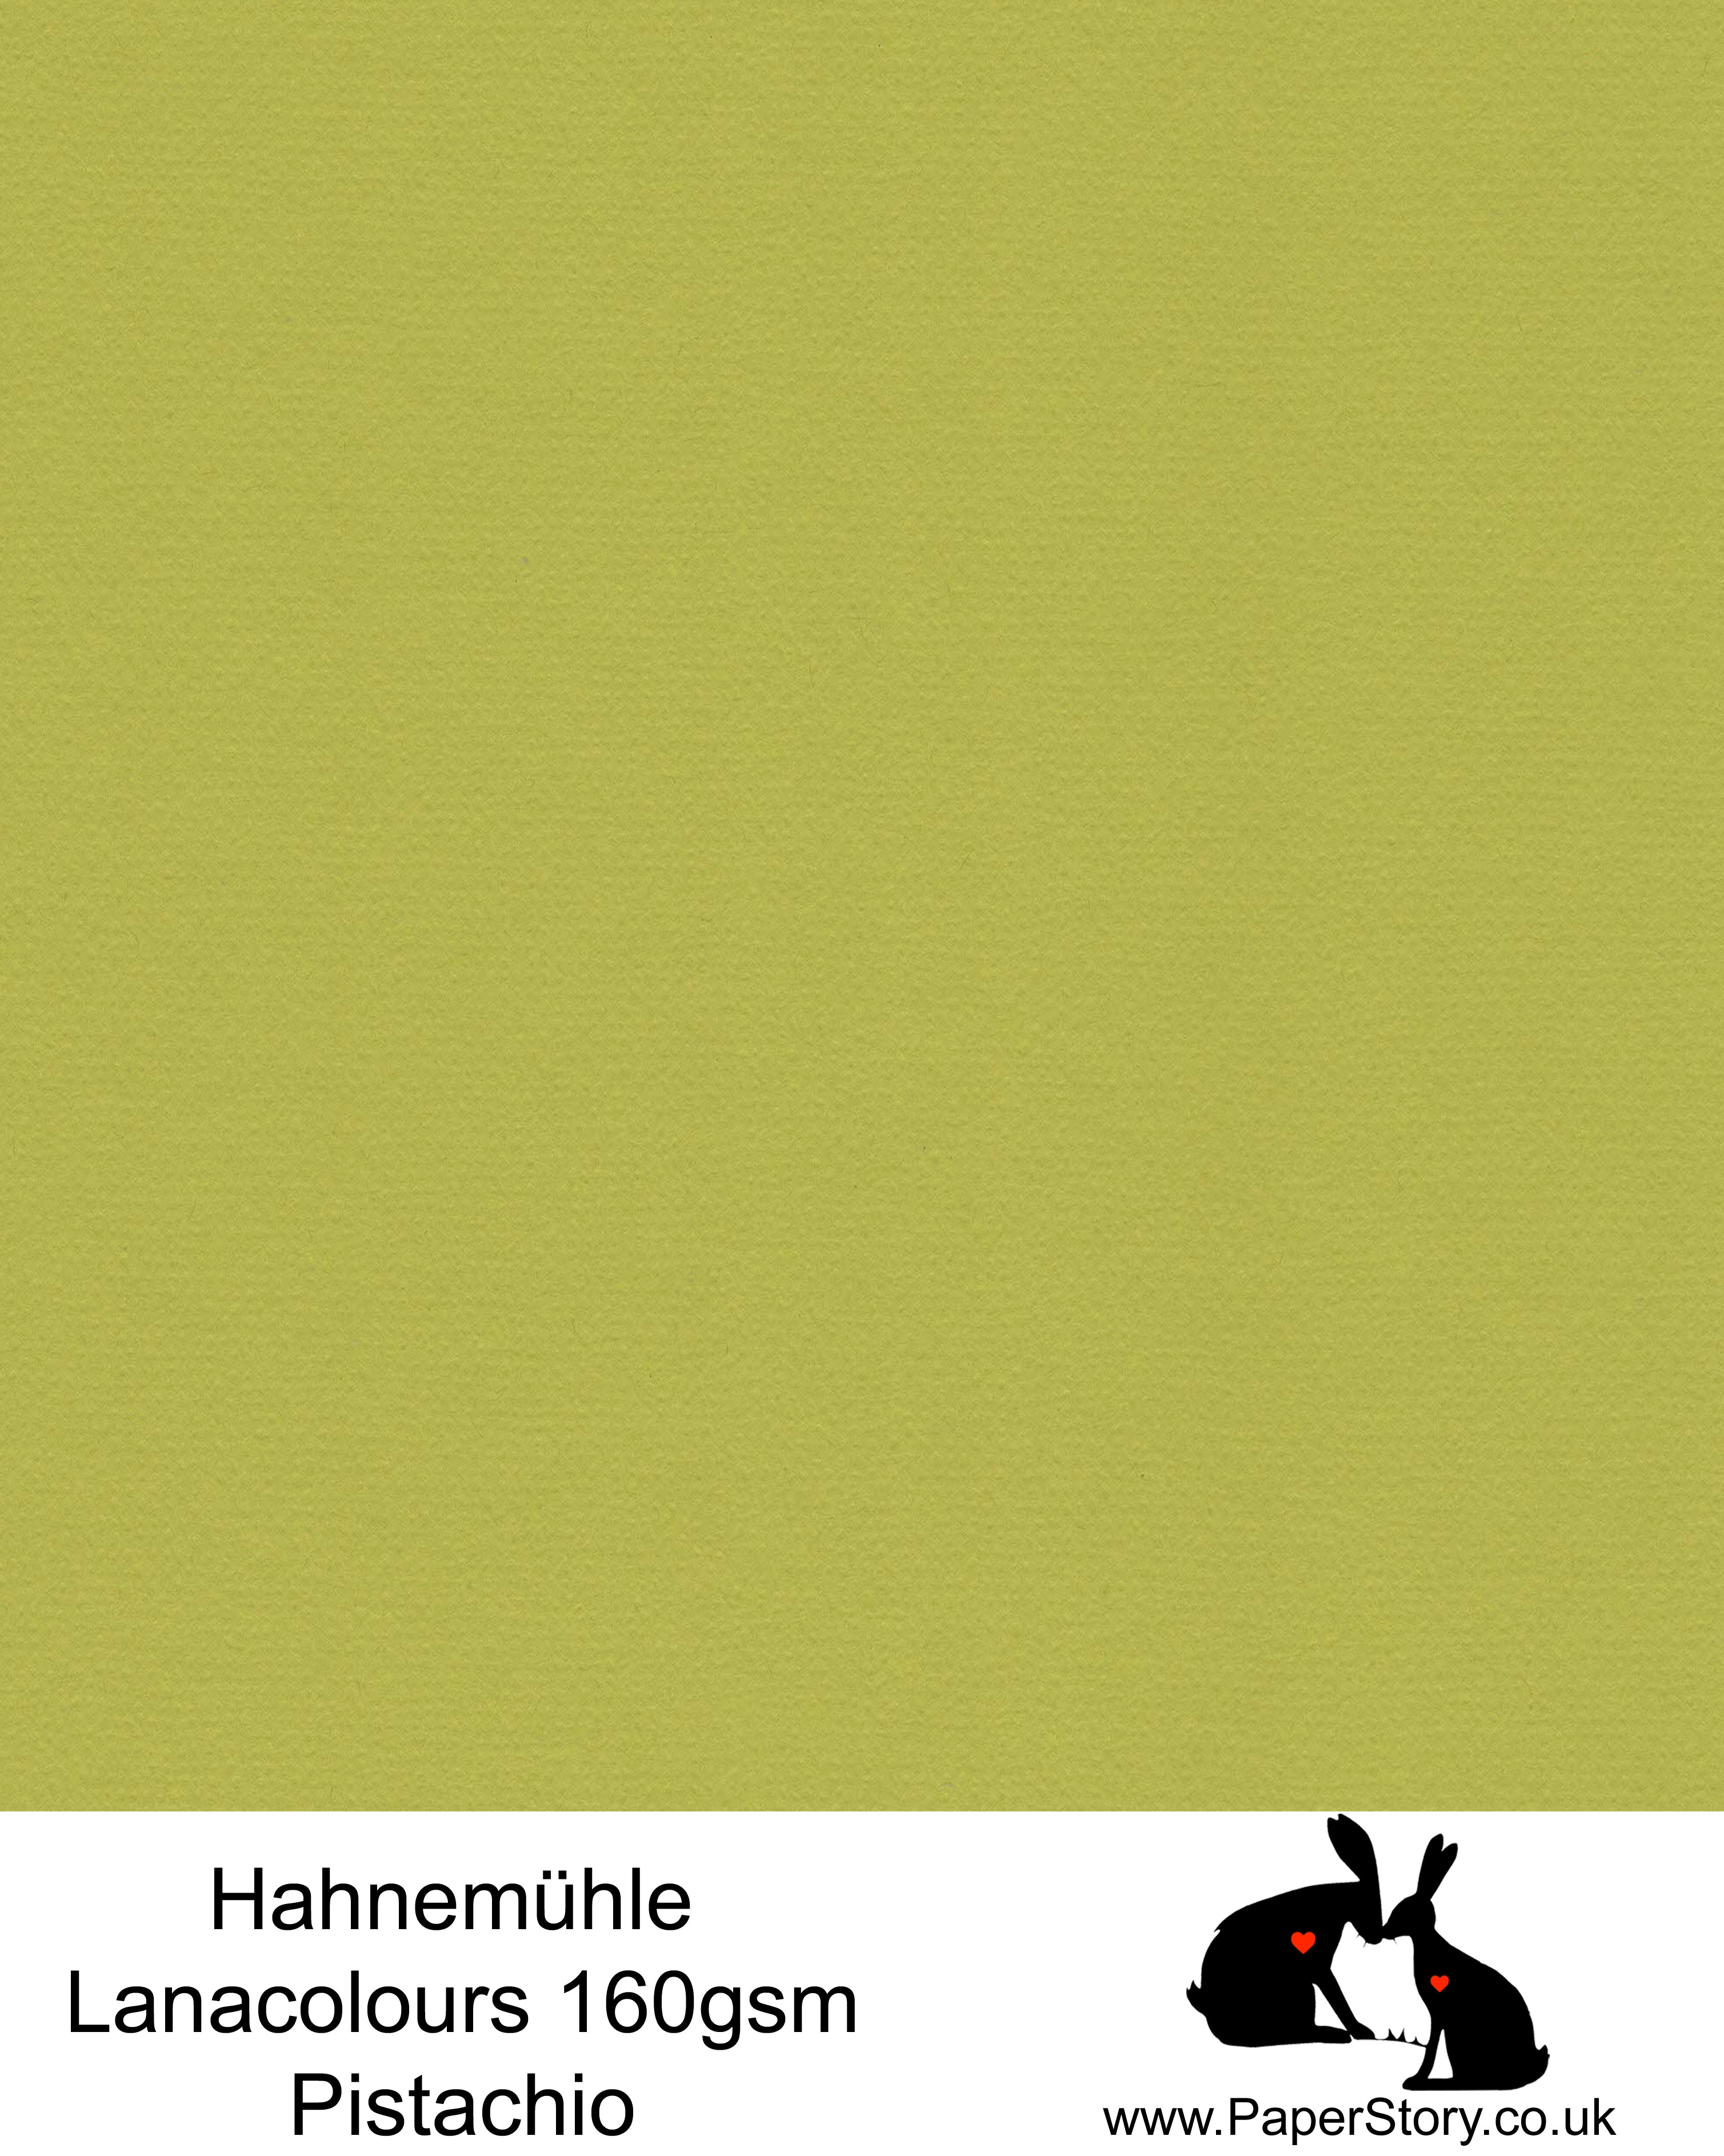 Hahnemühle Lana Colours pastel Pistachio green, hammered paper 160 gsm. Artist Premium Pastel and Papercutting Papers 160 gsm often described as hammered paper.